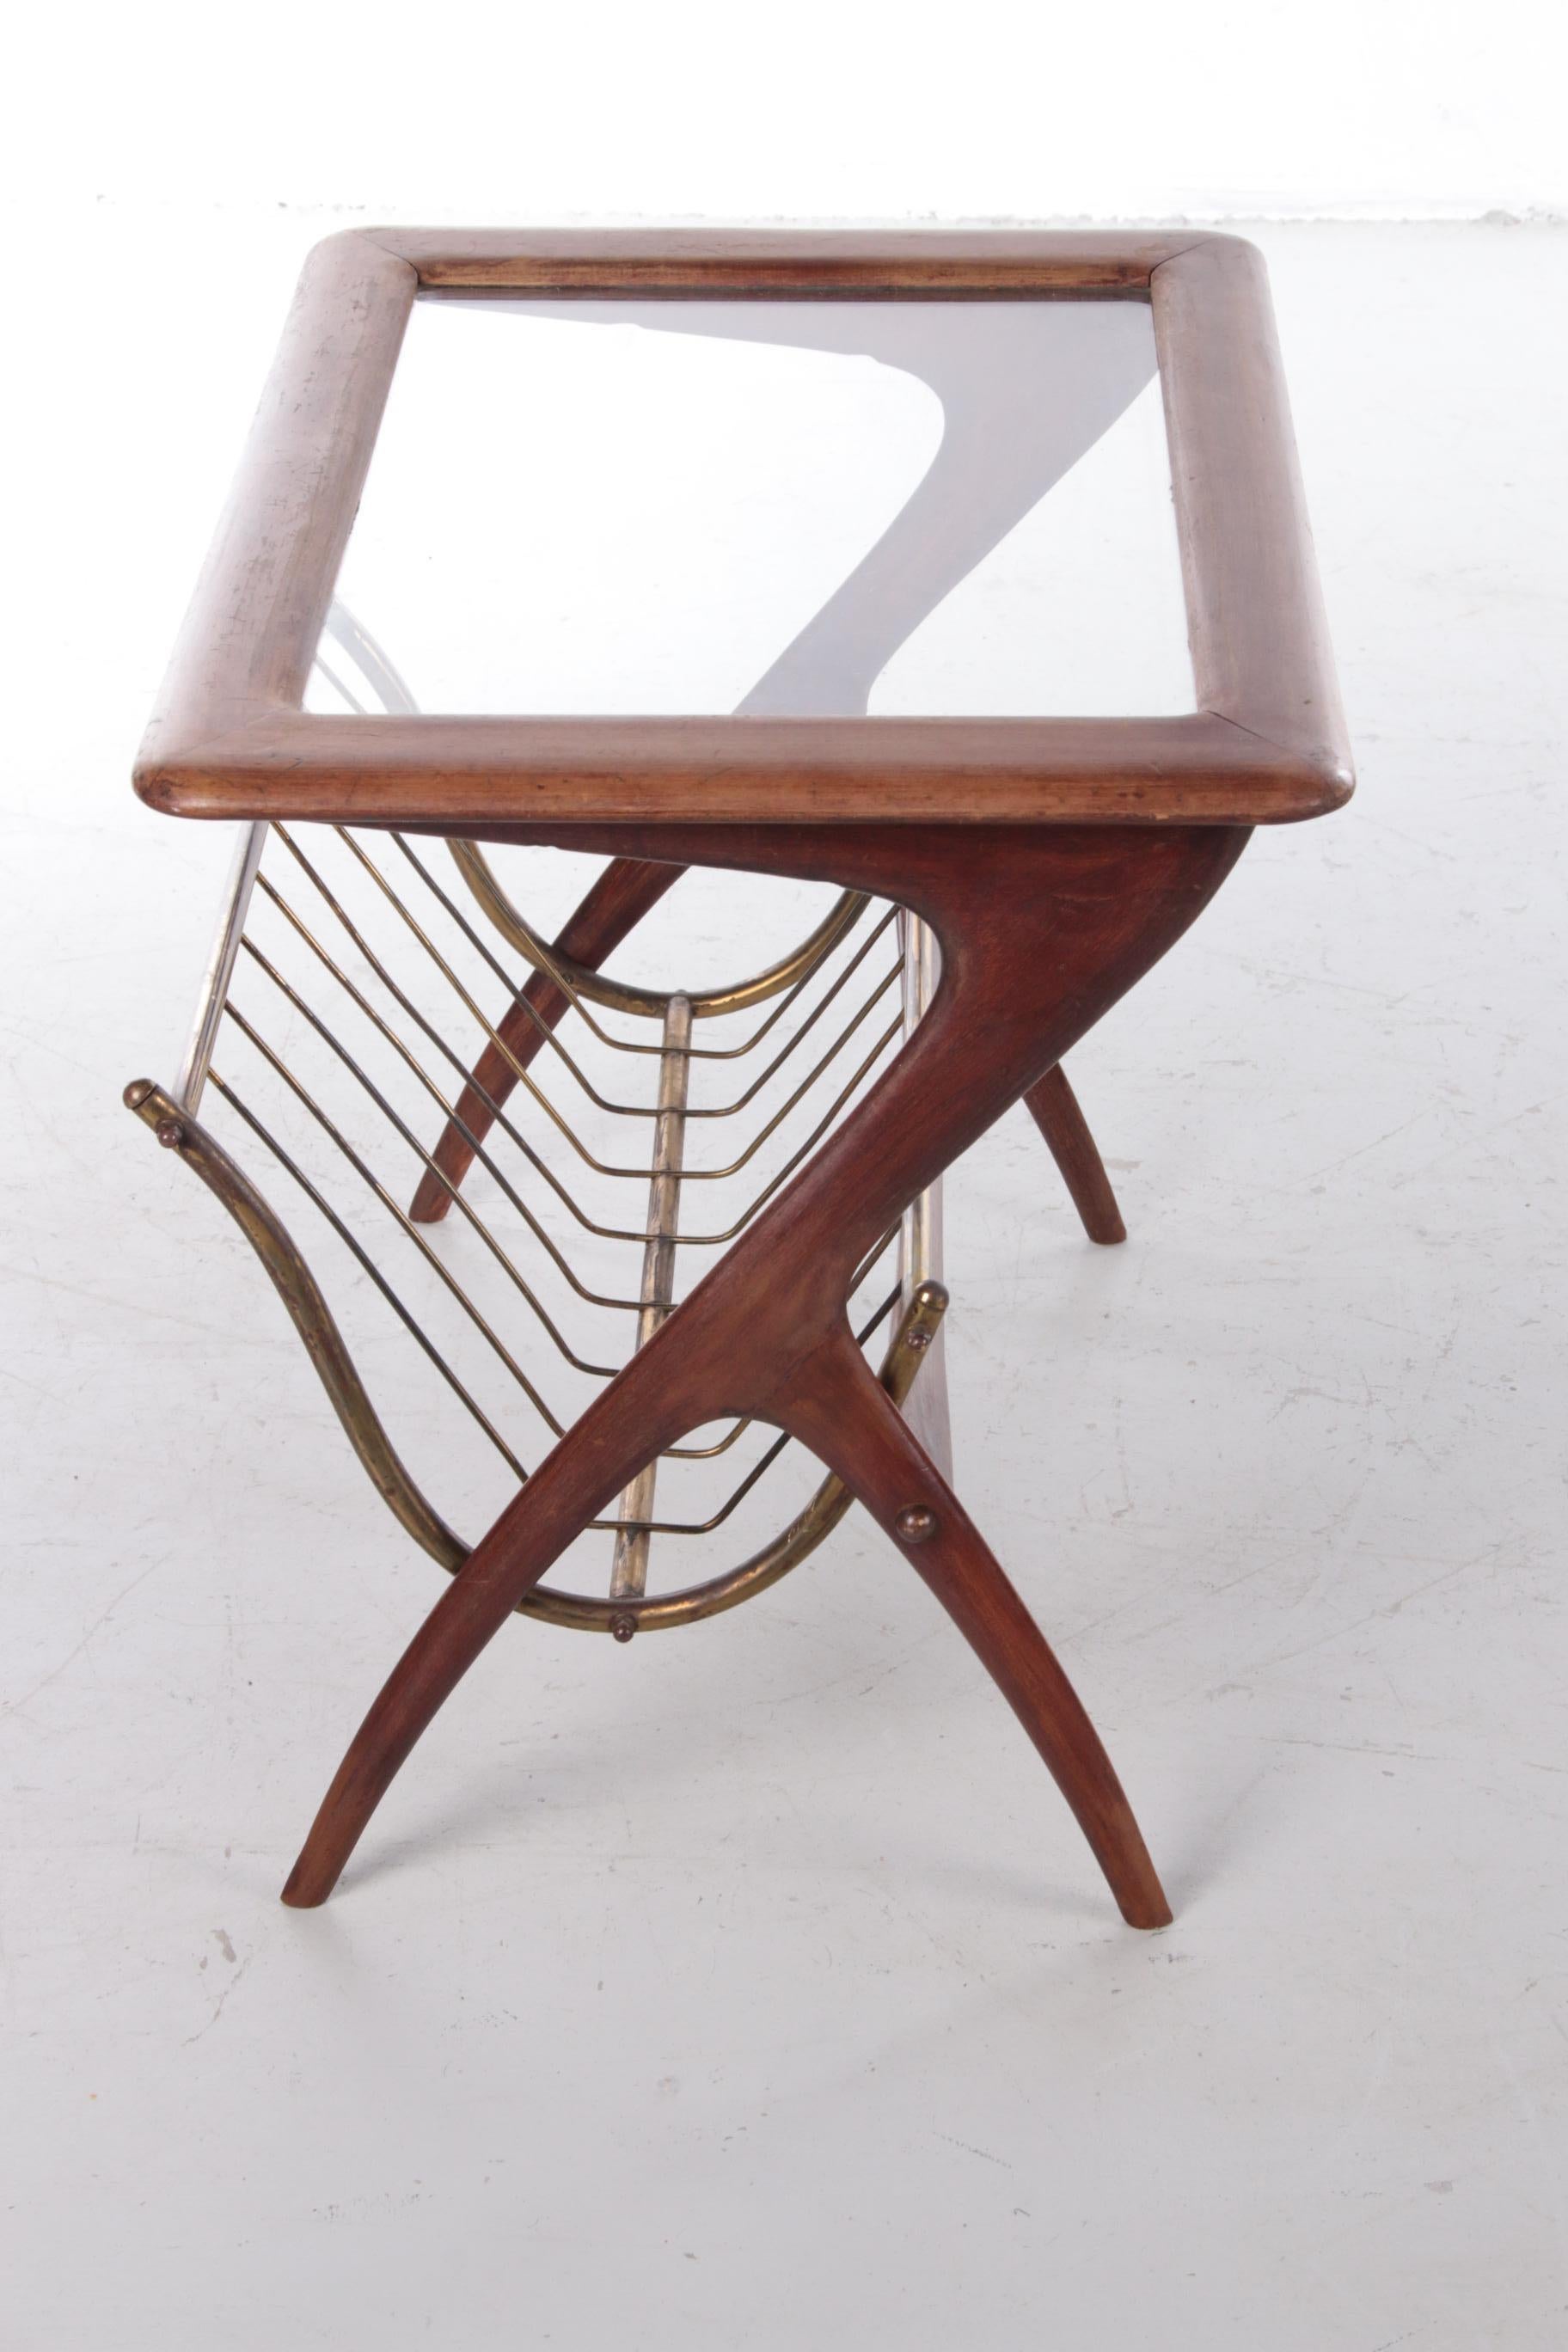 Mahogany Vintage Italian Side Table with Magazine Rack by Ico Parisi, 1960s For Sale